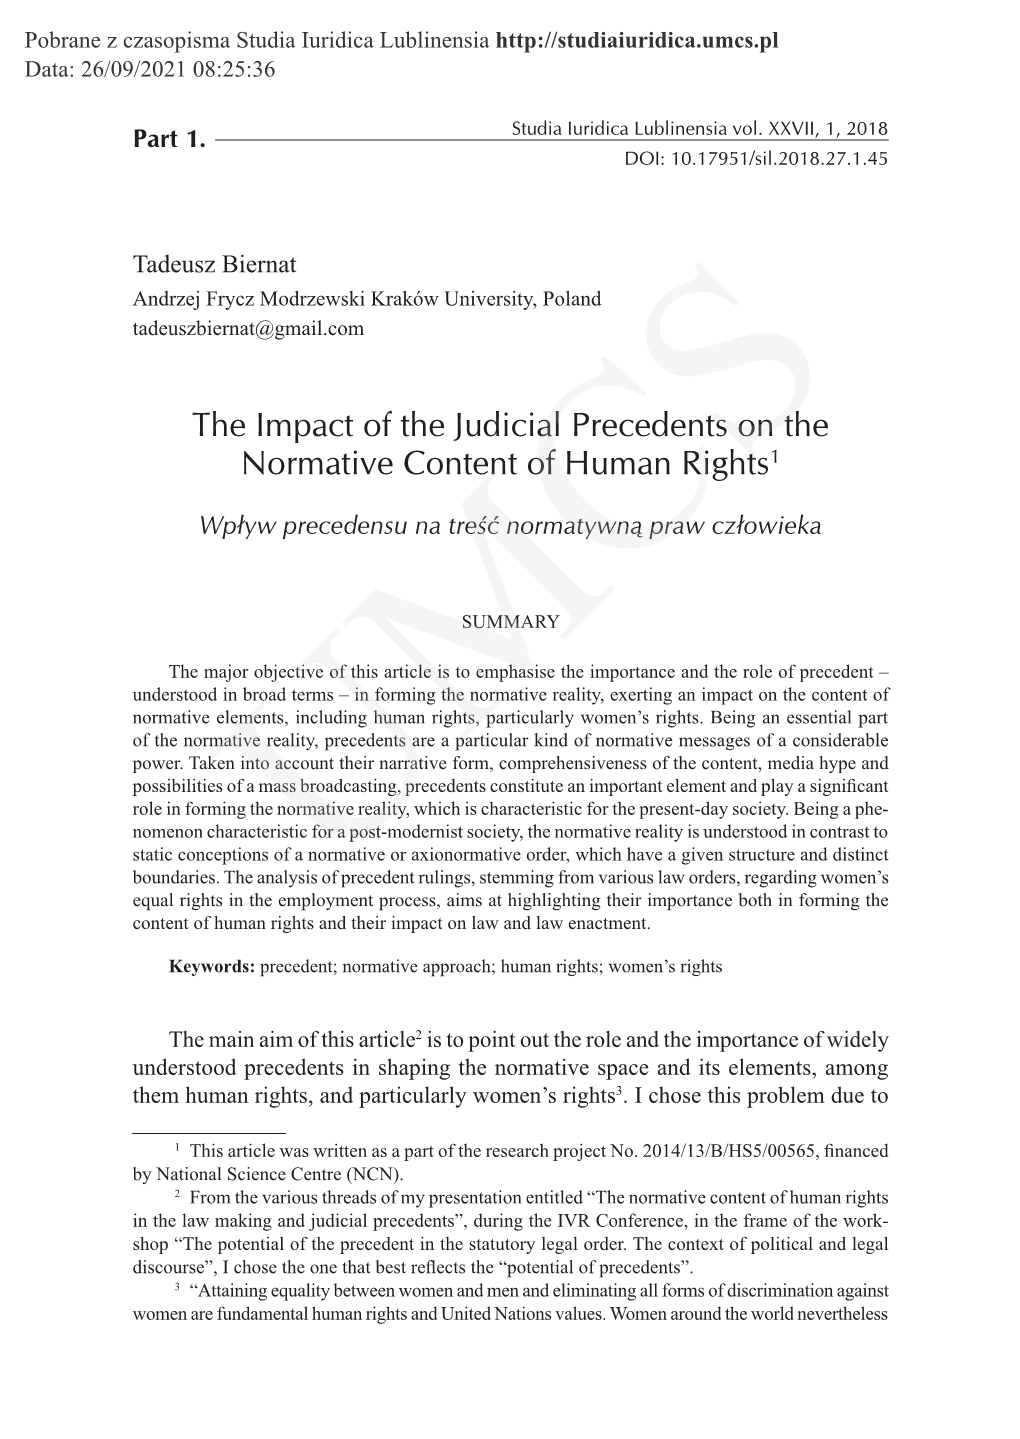 The Impact of the Judicial Precedents on the Normative Content of Human Rights1